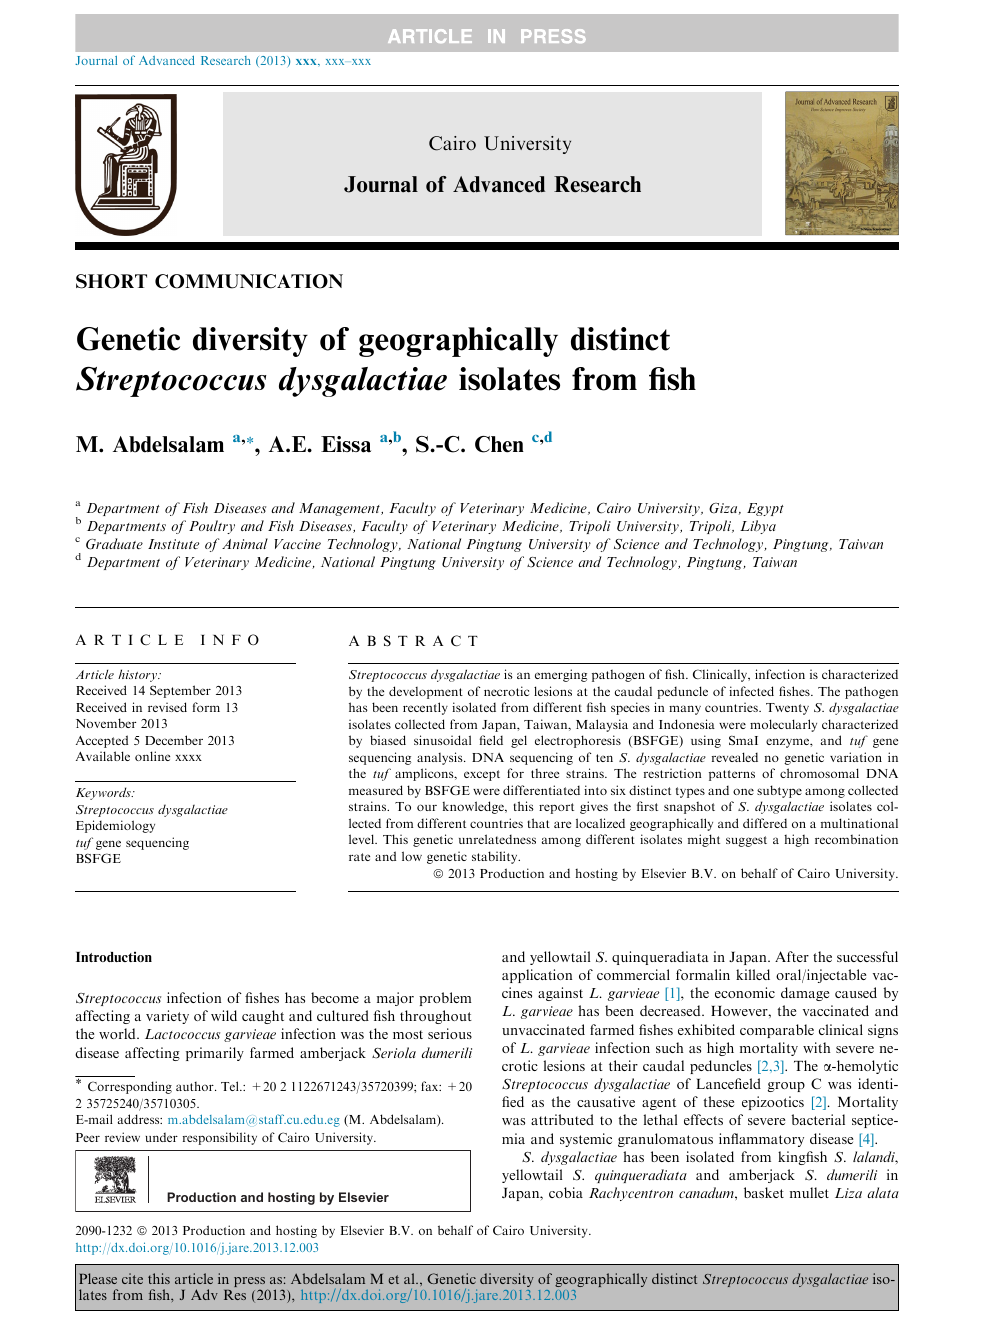 Genetic Diversity Of Geographically Distinct Streptococcus Dysgalactiae Isolates From Fish Topic Of Research Paper In Veterinary Science Download Scholarly Article Pdf And Read For Free On Cyberleninka Open Science Hub